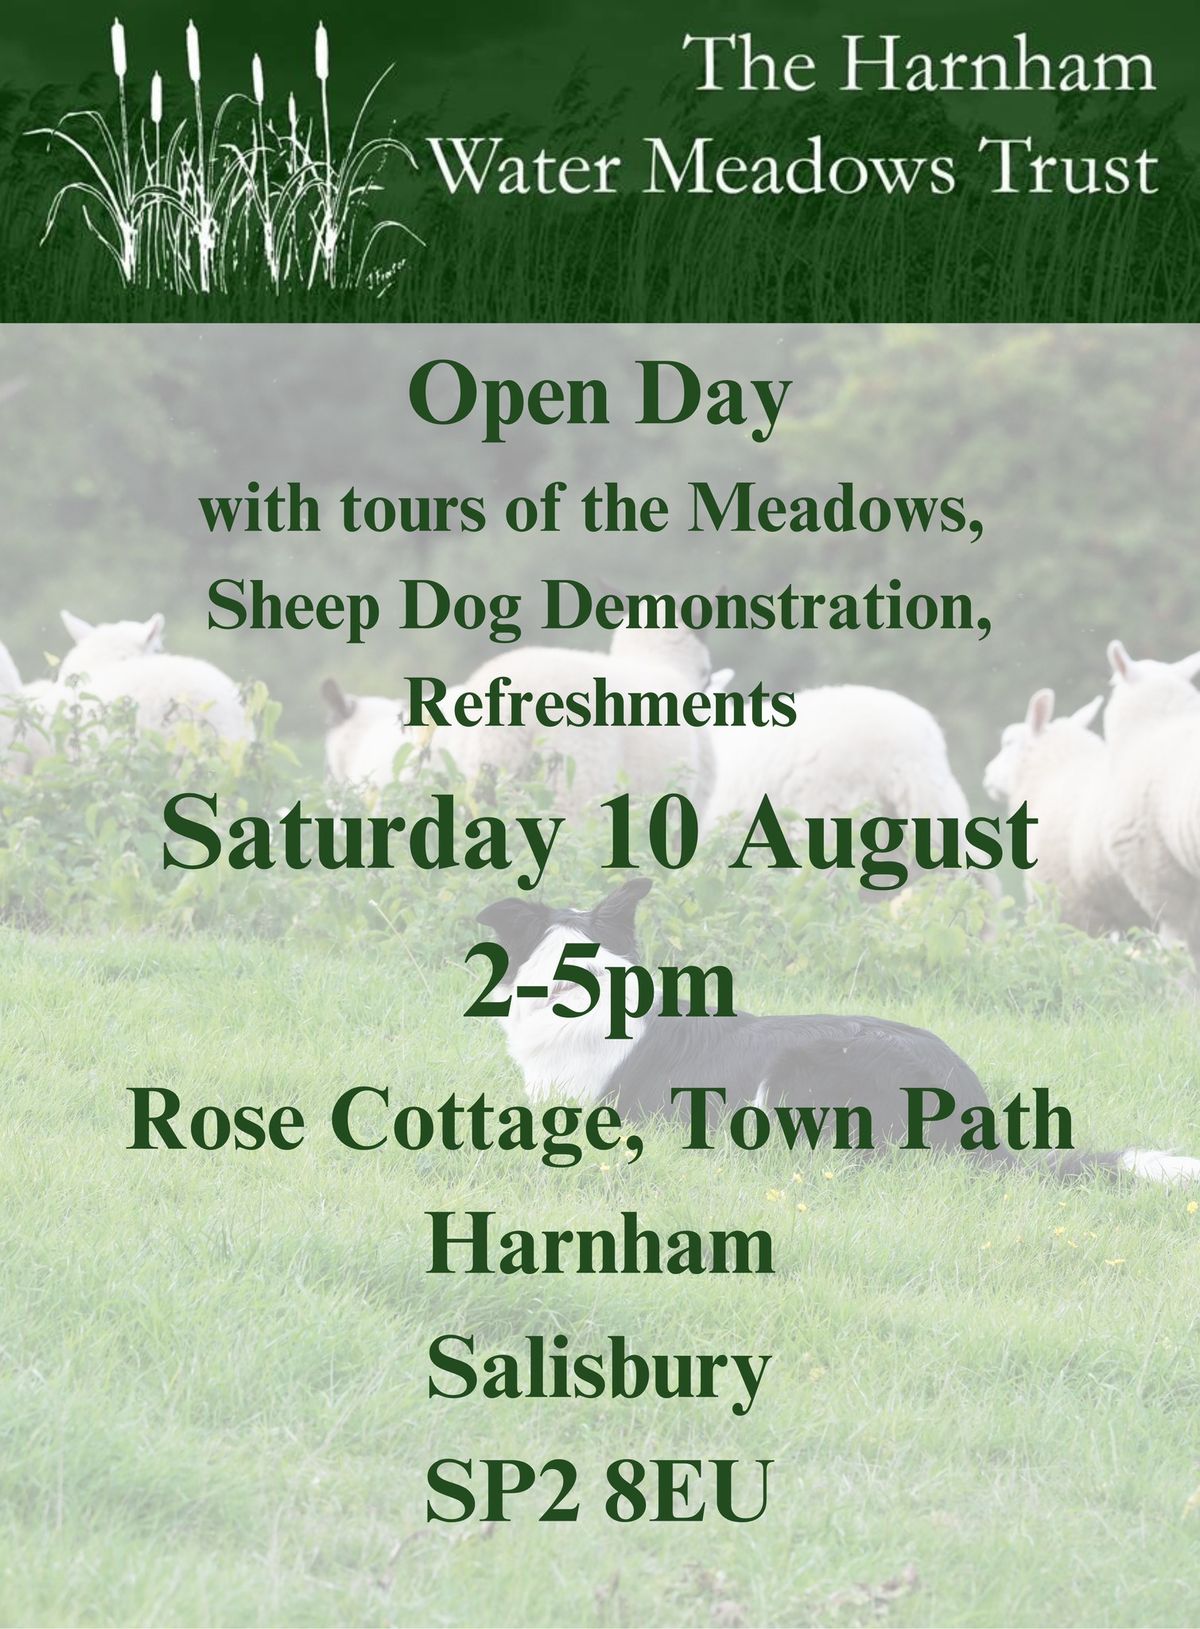 Open Day with tours of the Meadows, Sheep Dog Demonstration, refreshments